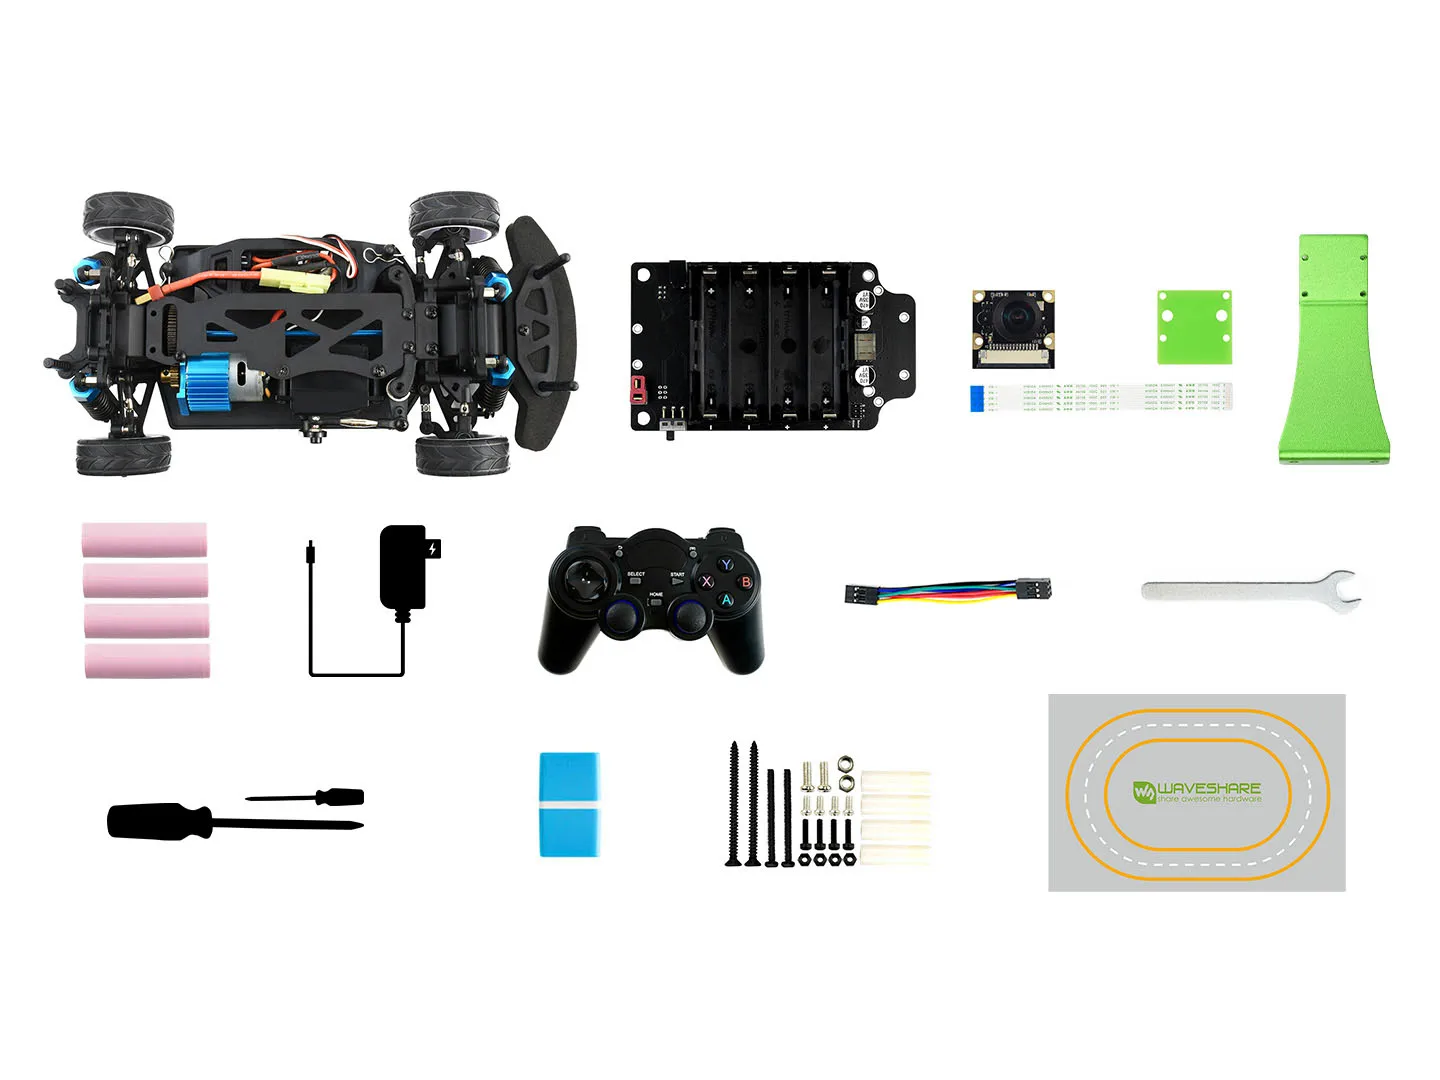 

PiRacer Pro AI Kit Acce,Without Pi4,High Speed AI Racing Robot Powered by Raspberry Pi 4,Supports DonkeyCar Project,Self Driving